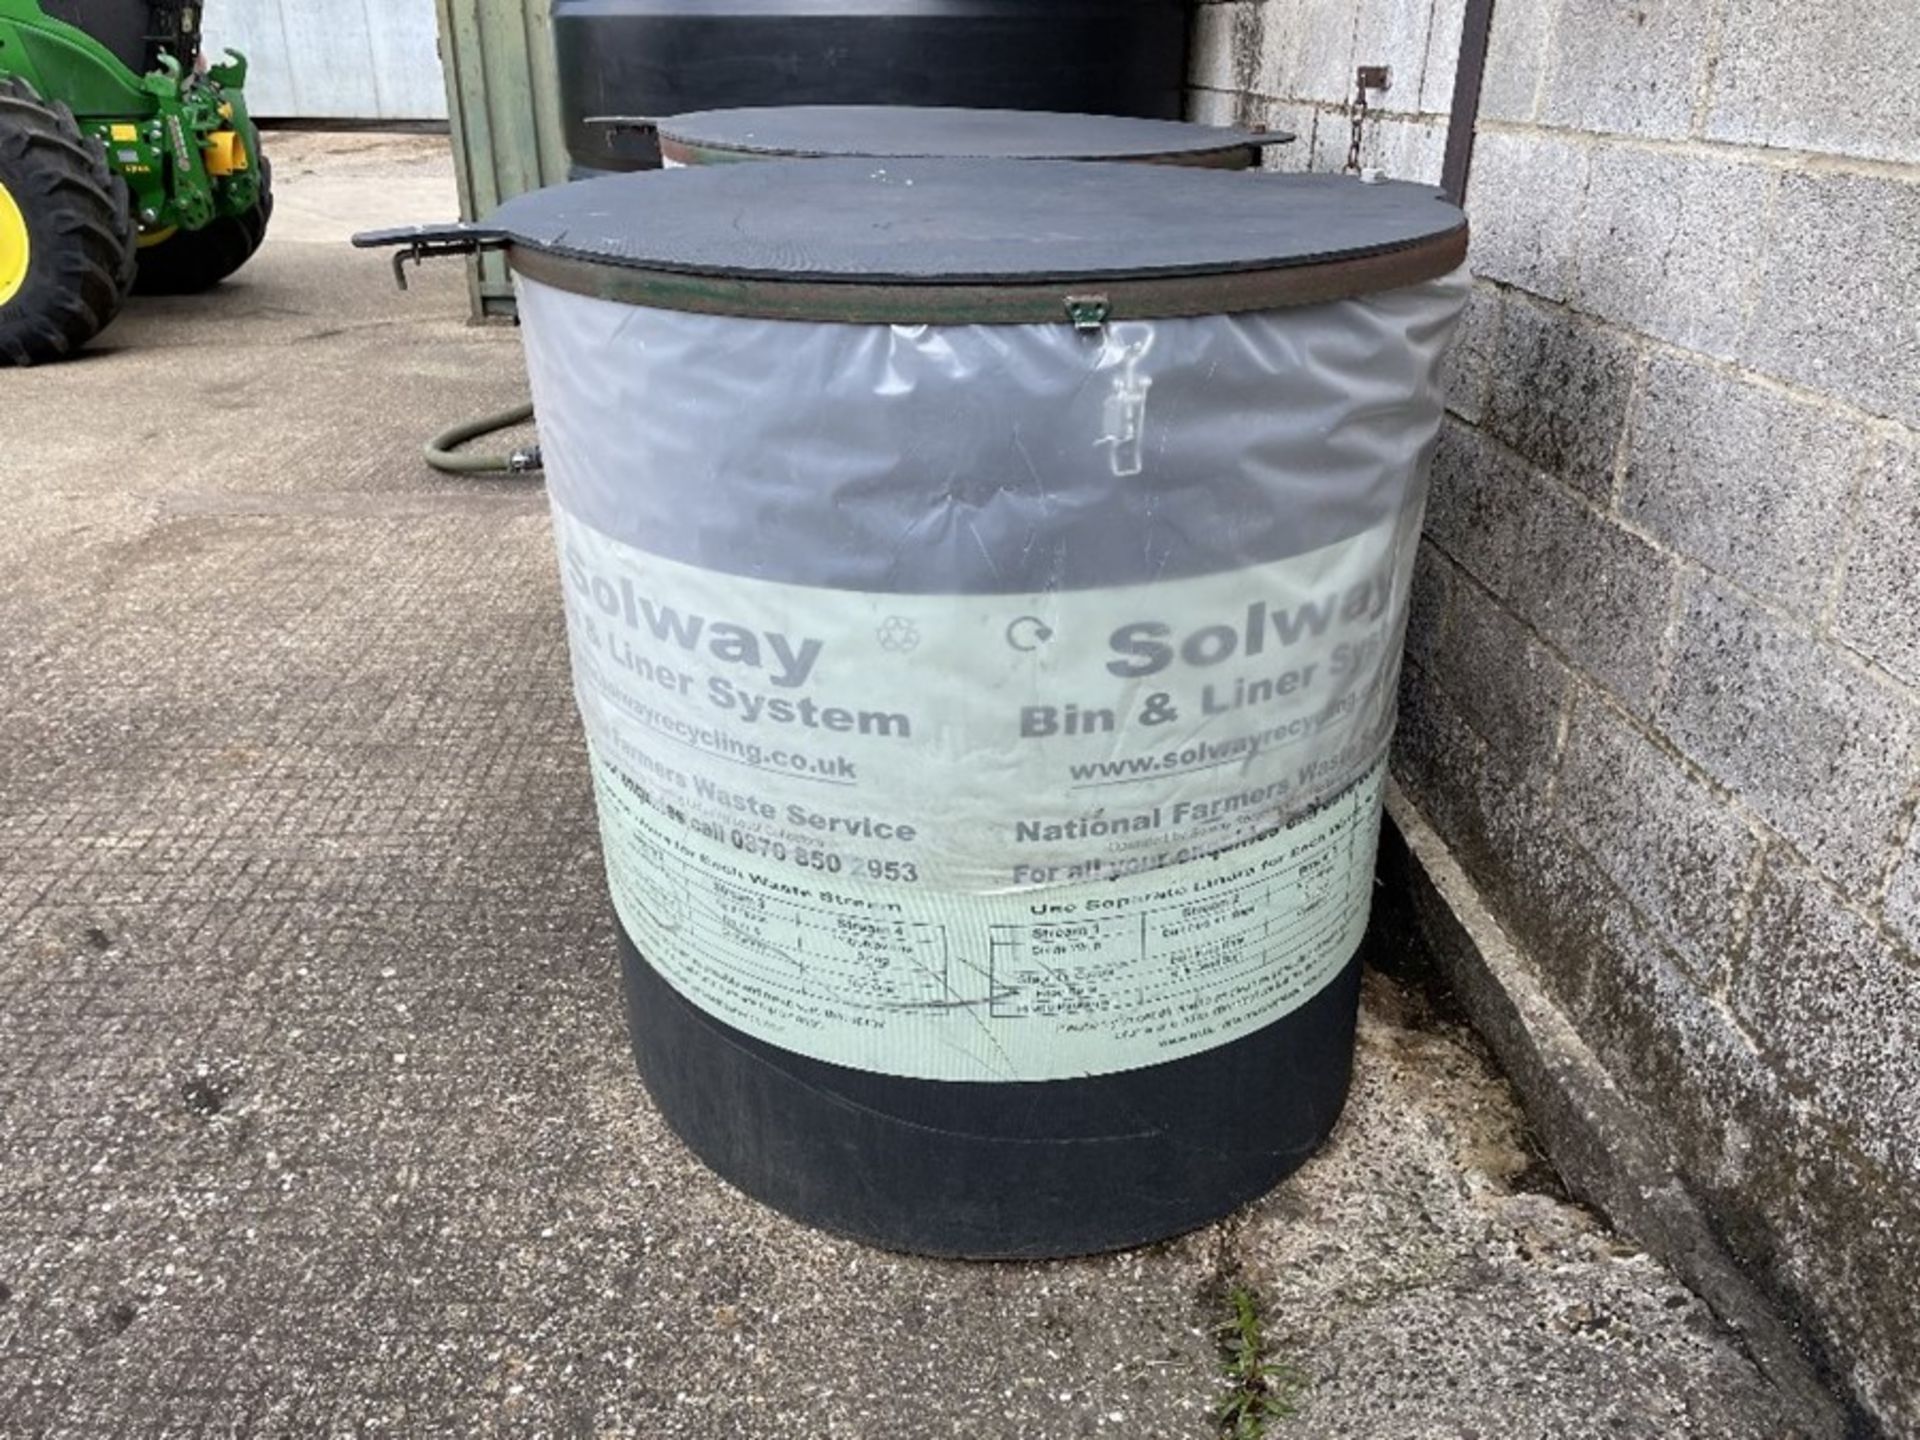 Solway Bin and Liner System Unit